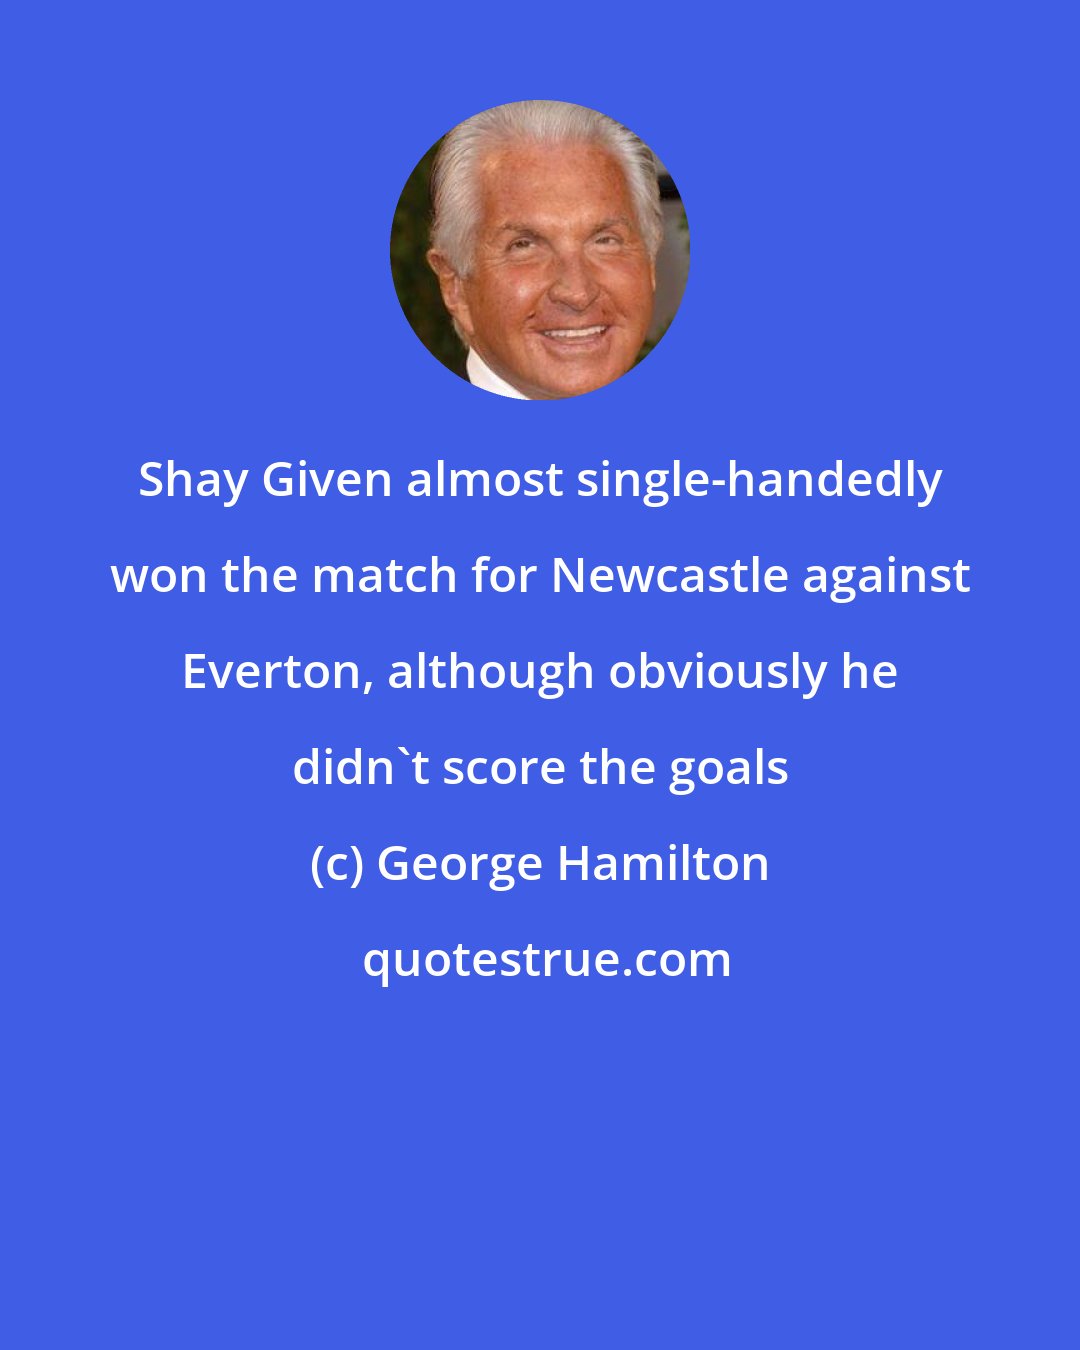 George Hamilton: Shay Given almost single-handedly won the match for Newcastle against Everton, although obviously he didn't score the goals